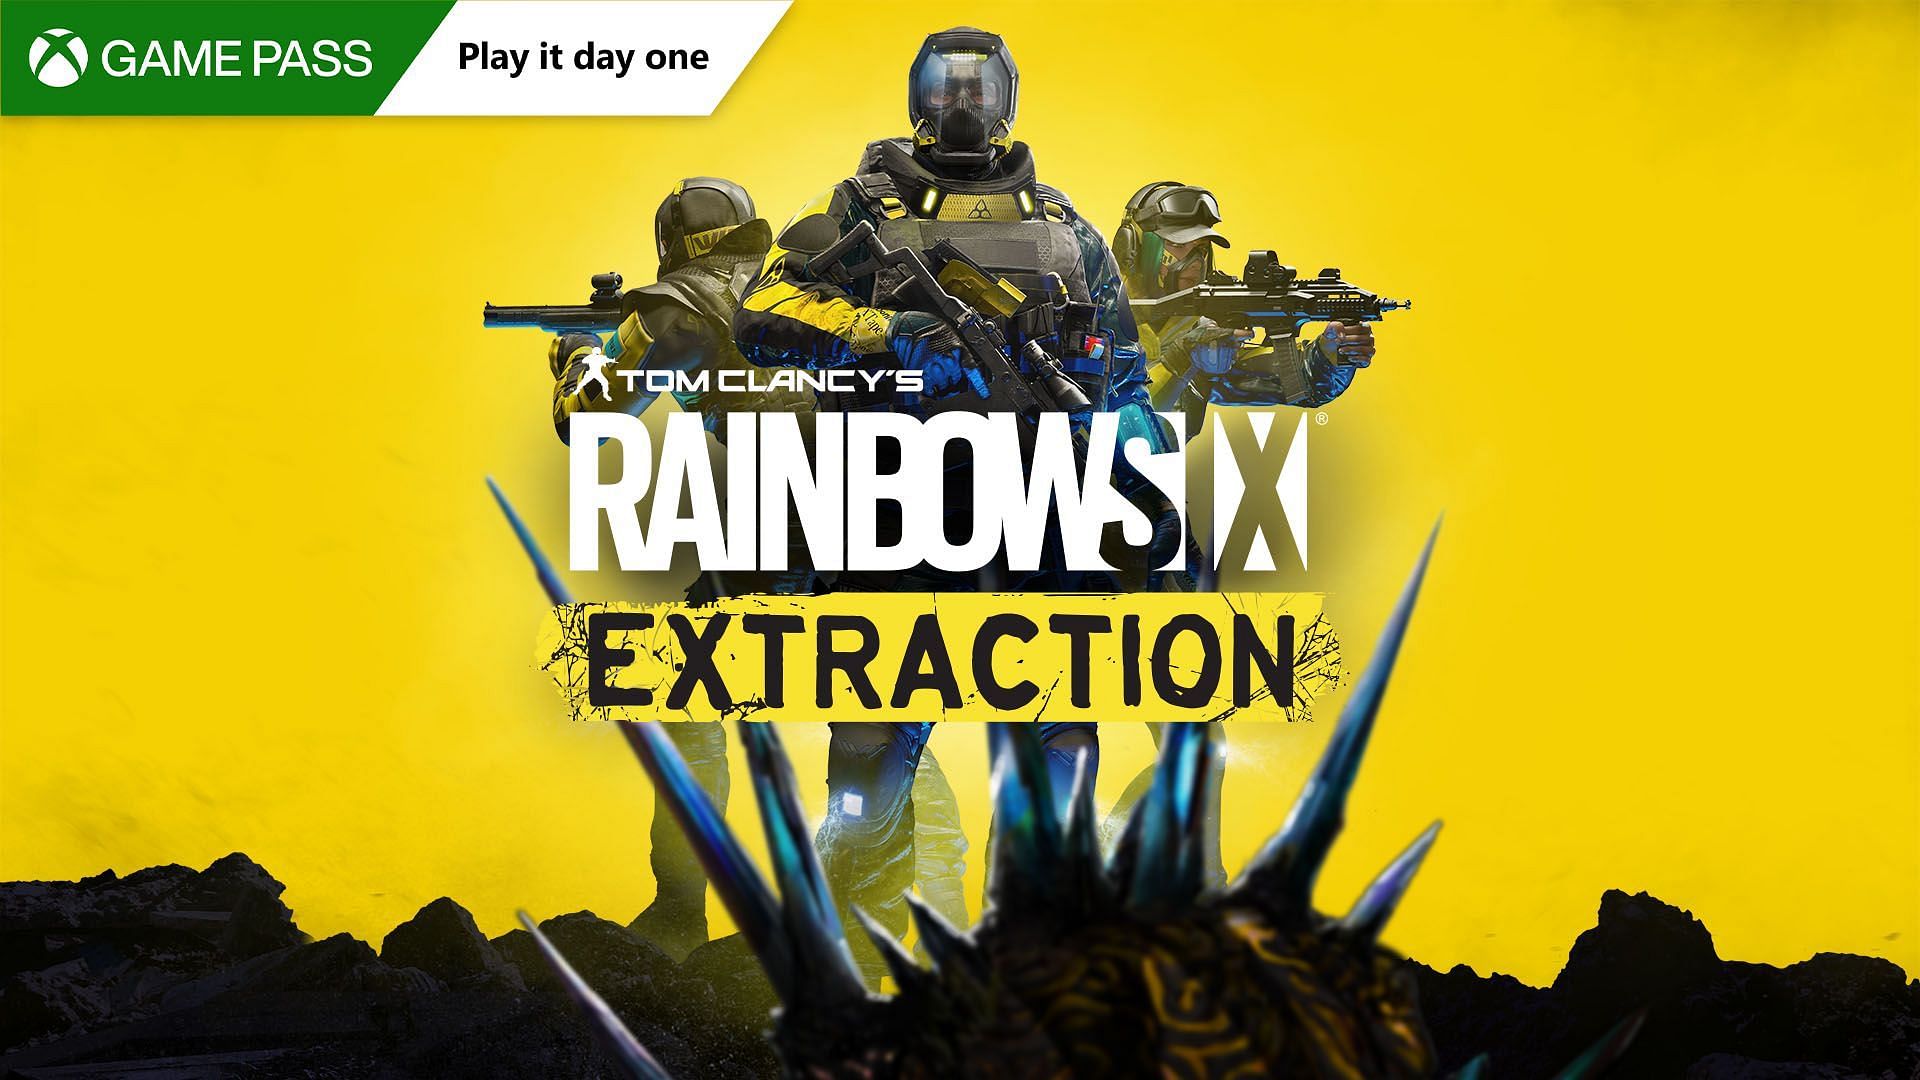 Rainbow Six Extraction is coming to the Game Pass on Day 1 of launch (Image via Activision)